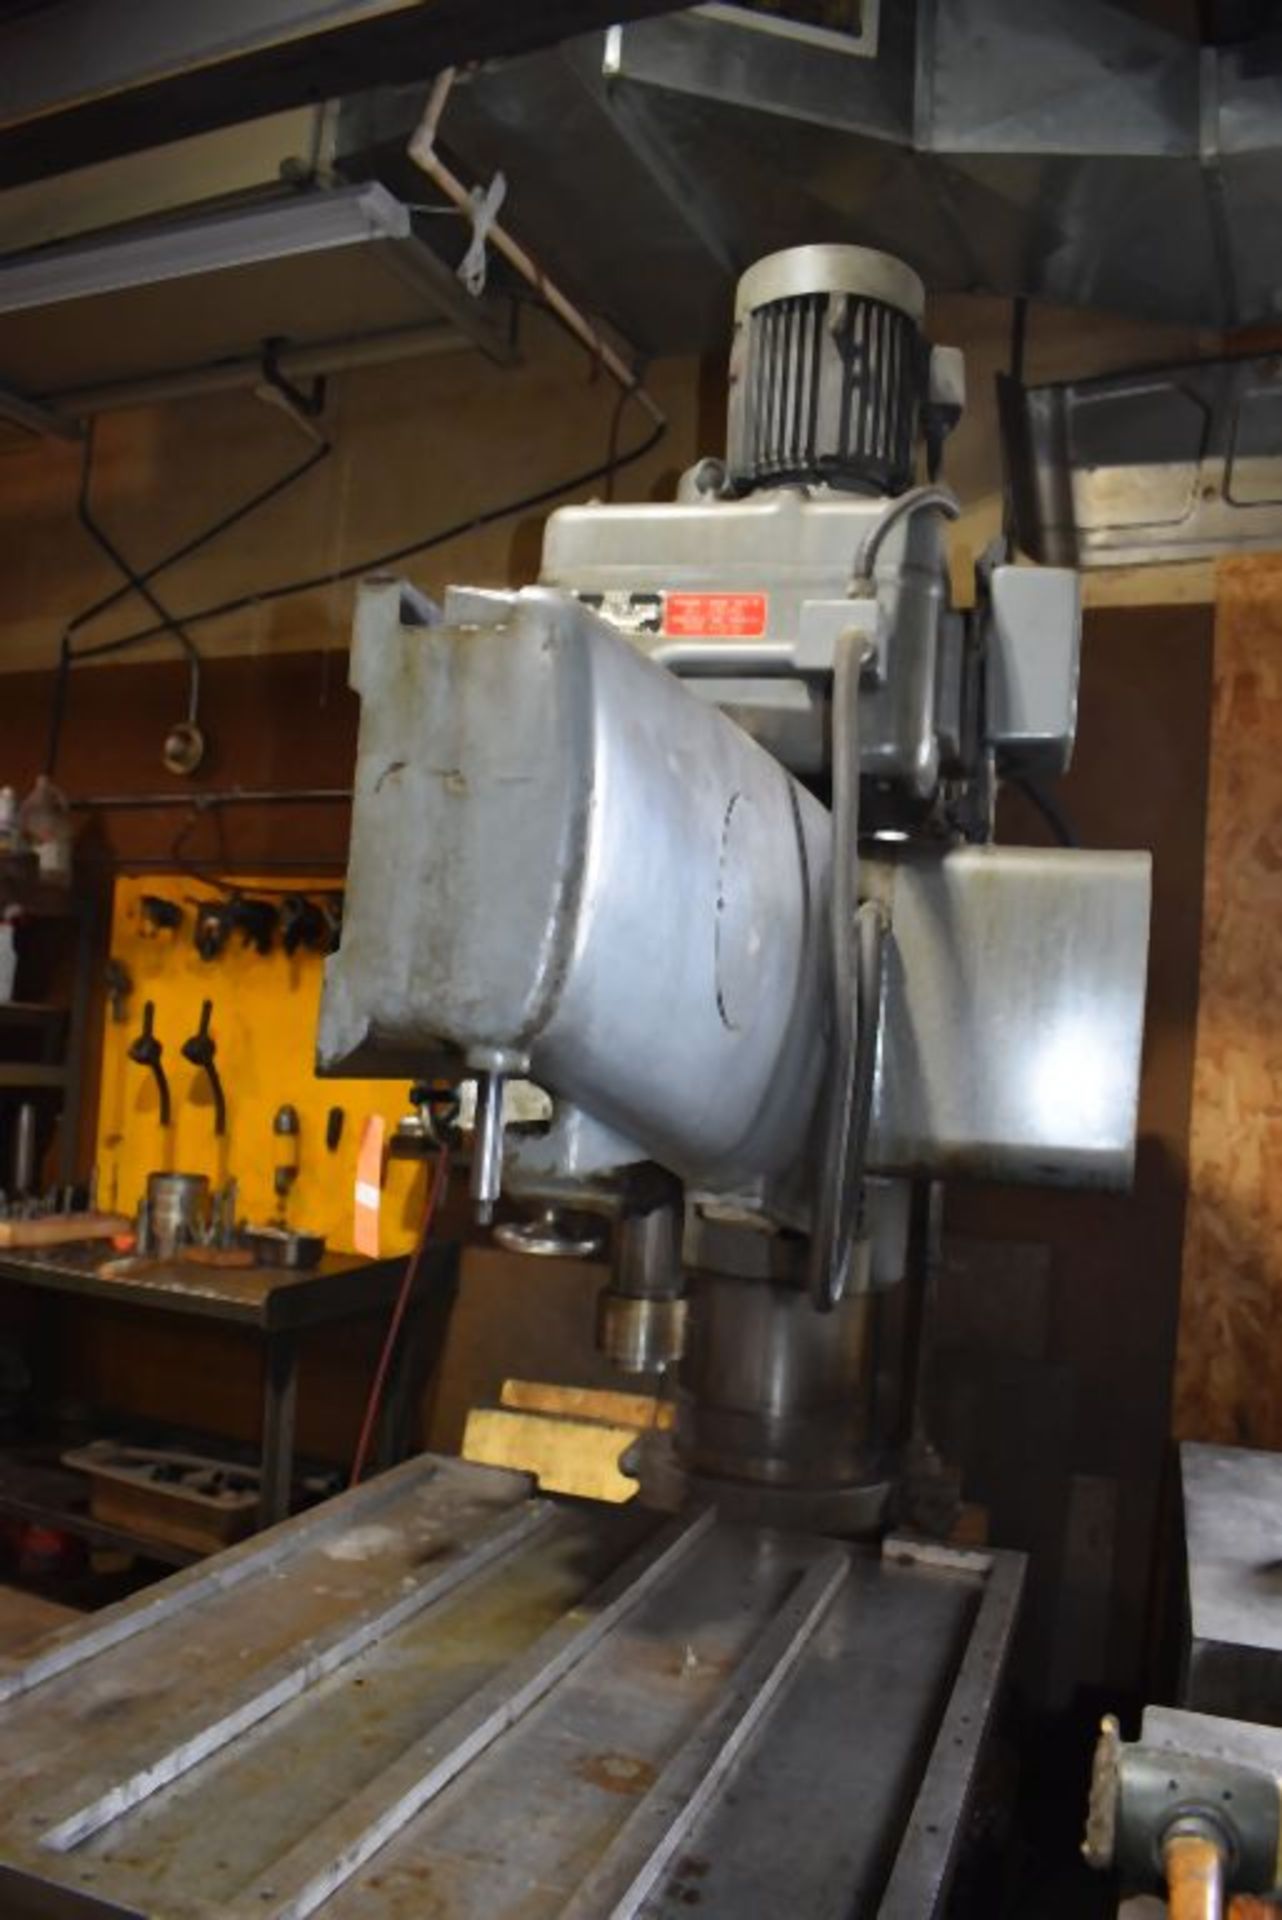 1979 IKEDA RADIAL ARM DRILL, MODEL RM-1300, S/N: 79087, 13" COLUMN x 60" ARM, 36" x 48" TABLE, T- - Image 4 of 4